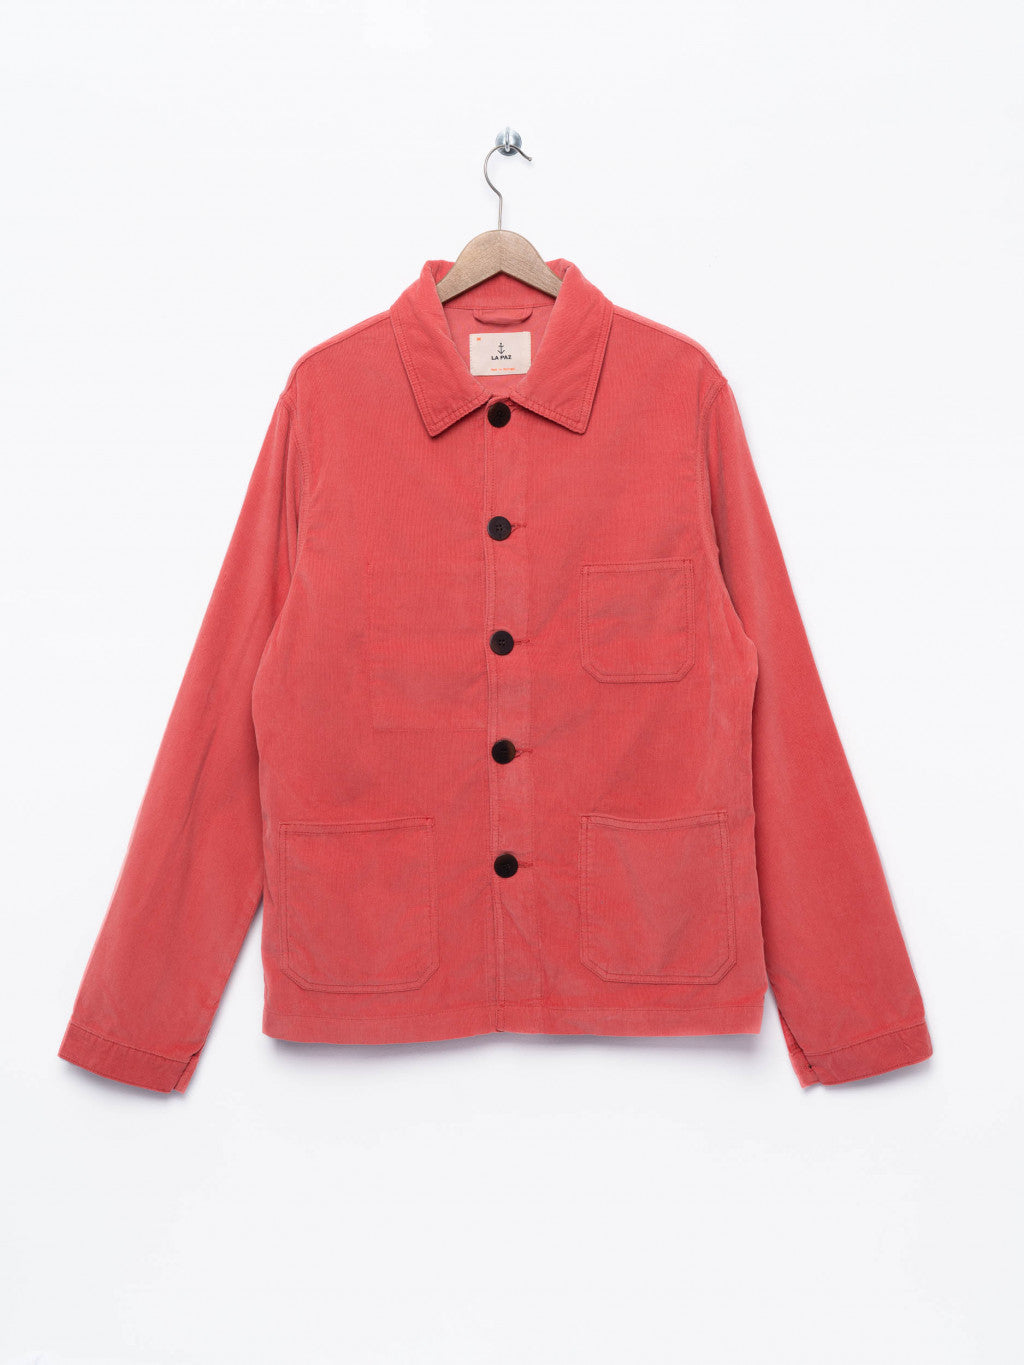 Worker jacket, spiced coral, baby cord